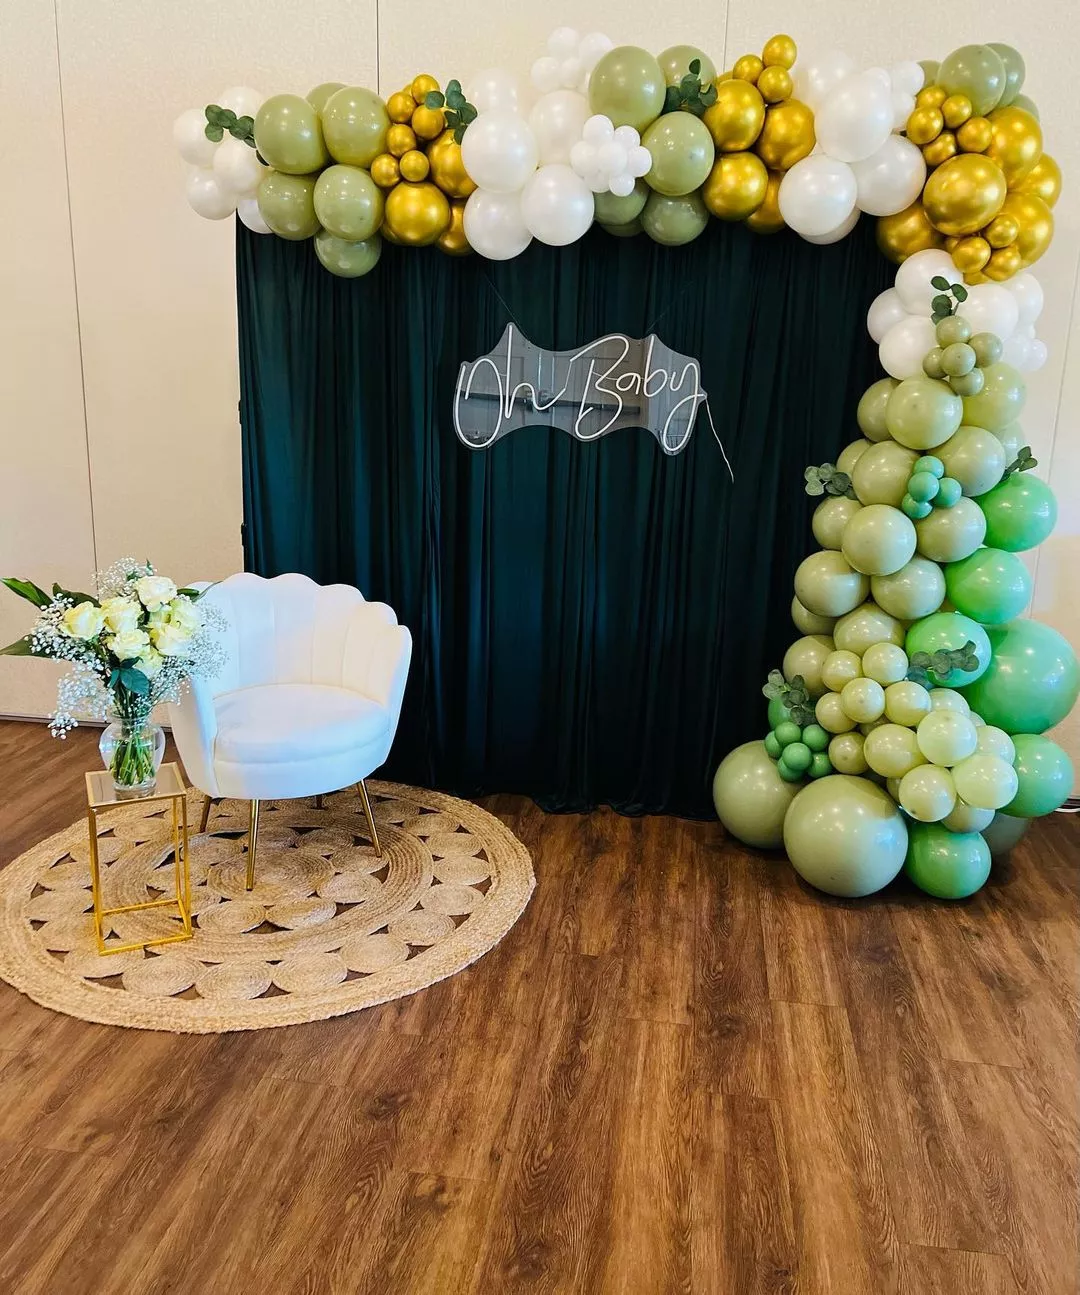 Neat and clean baby shower decoration